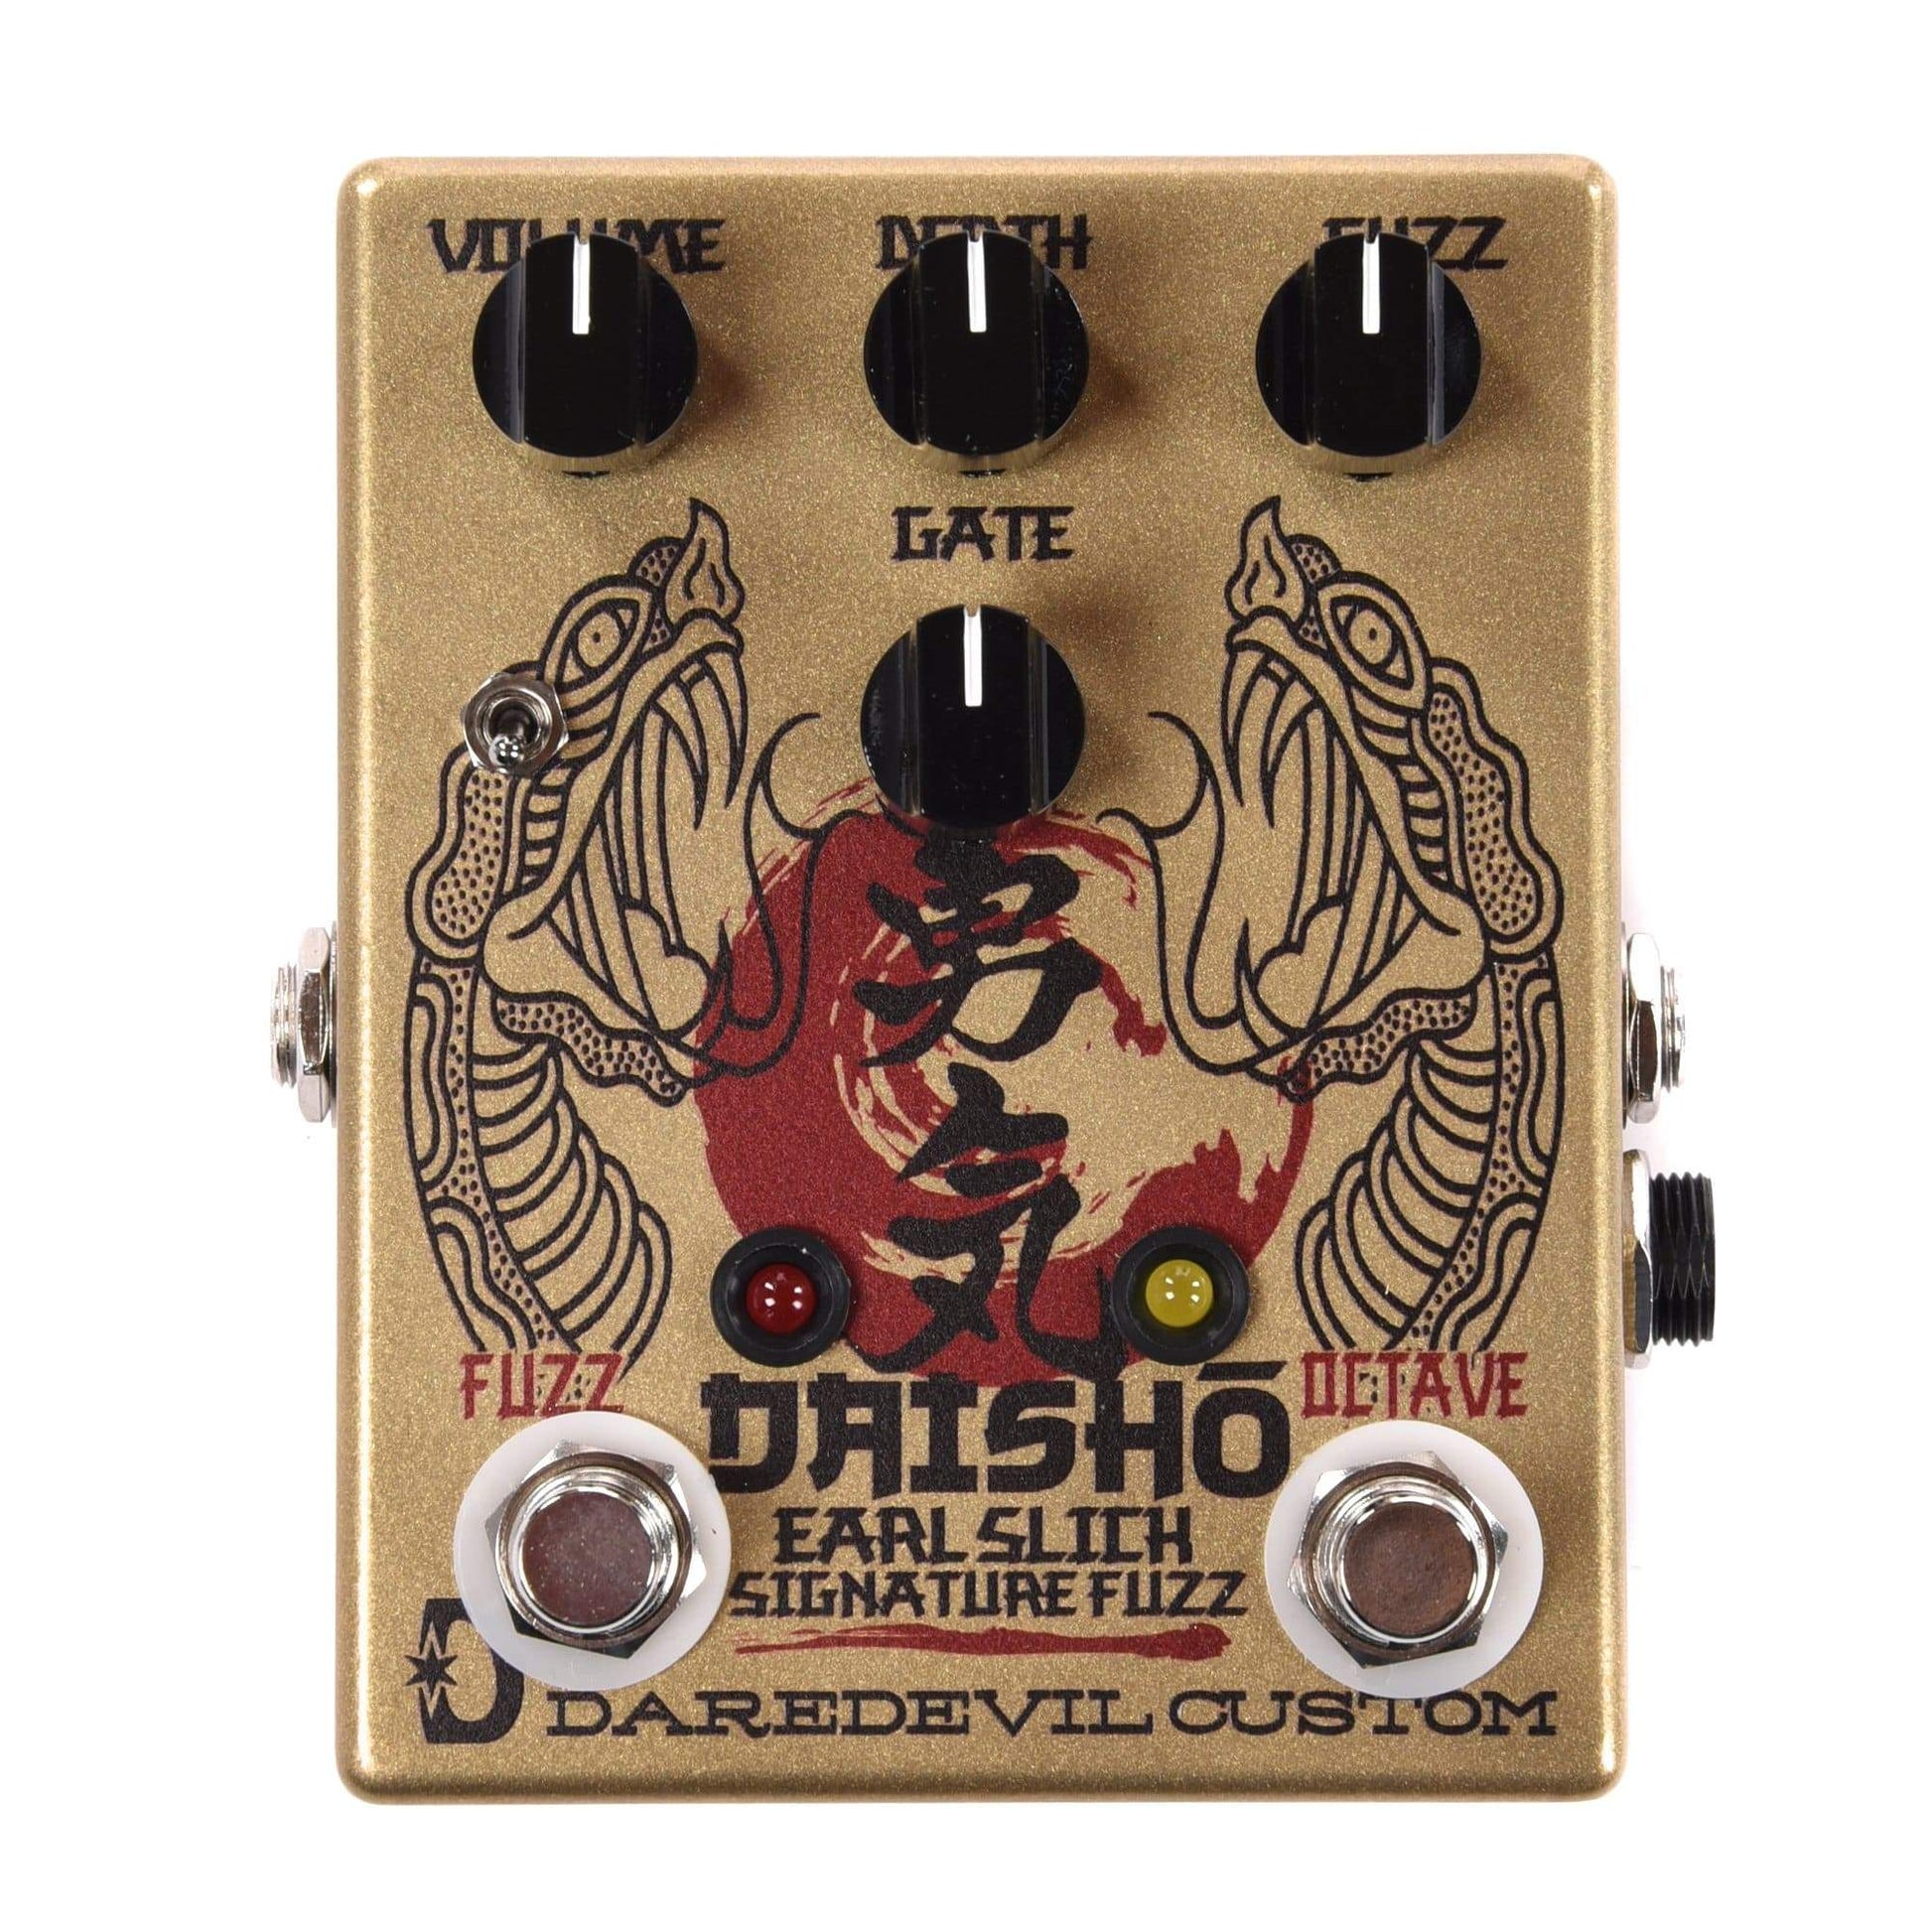 Daredevil Pedals Daisho Earl Slick Signature Fuzz and Octave Effects and Pedals / Fuzz